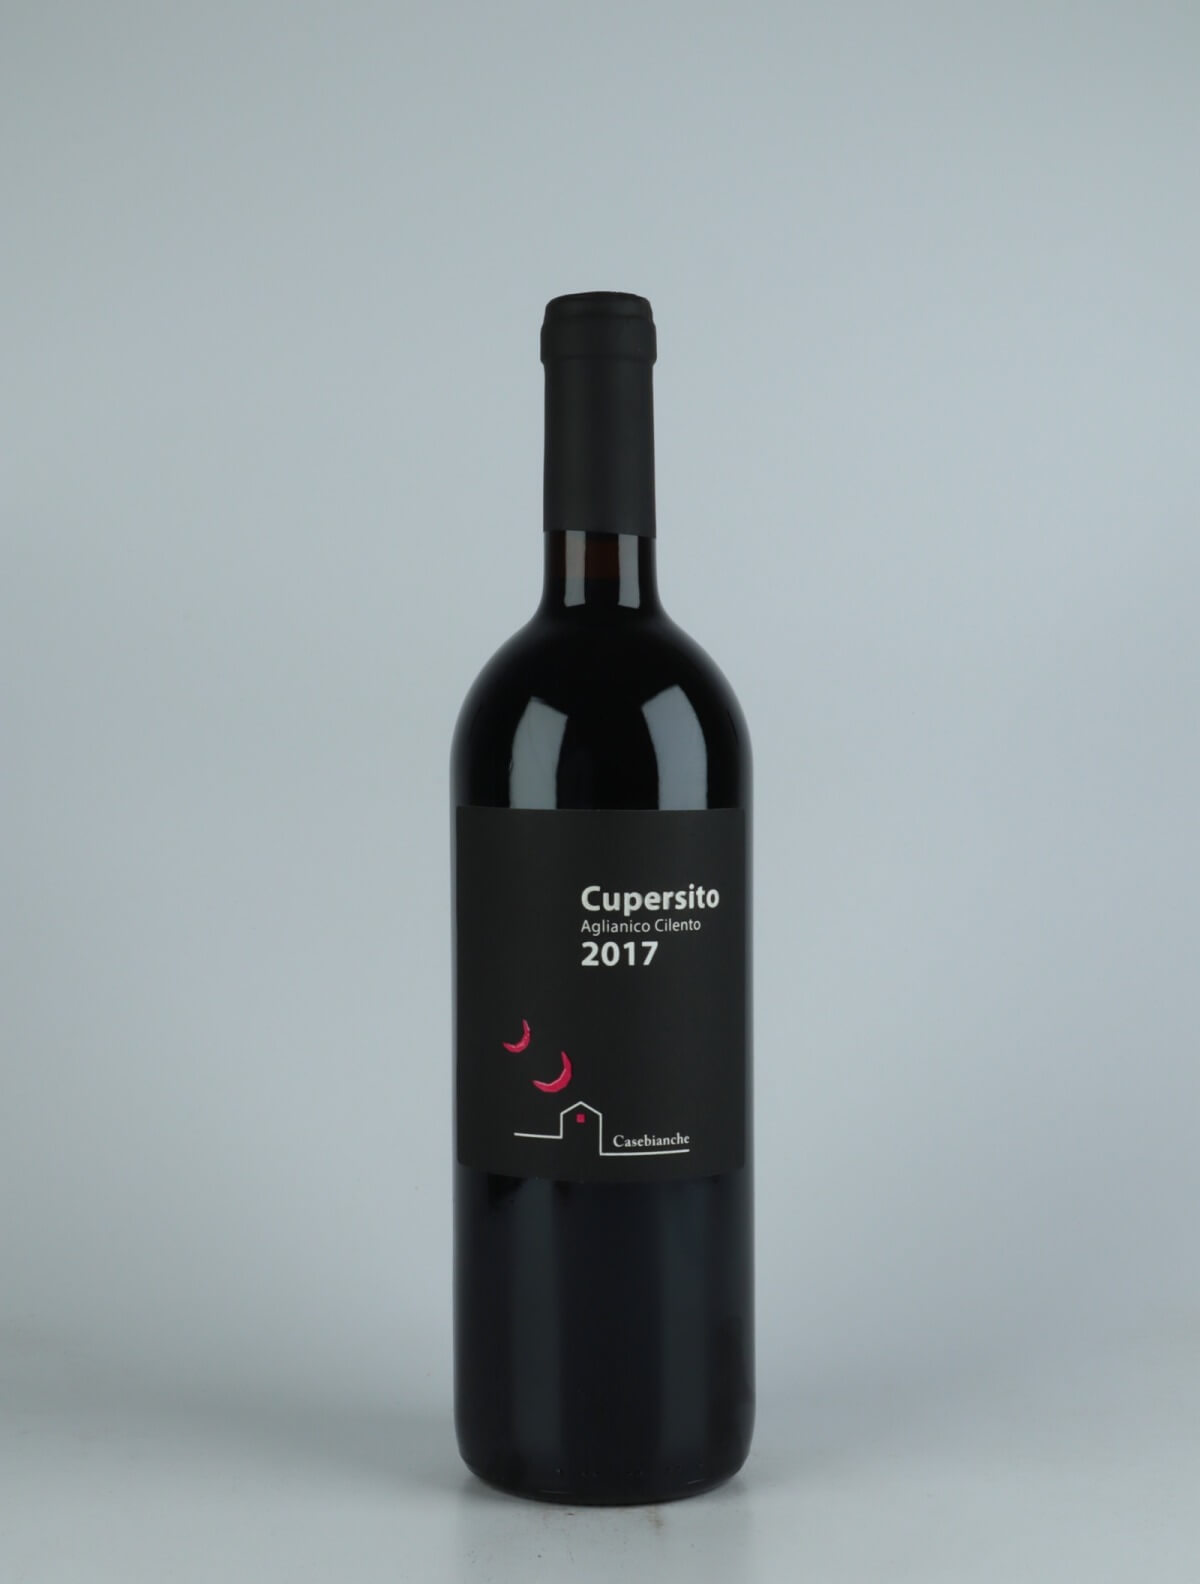 A bottle 2017 Cupersito Red wine from Casebianche, Campania in Italy